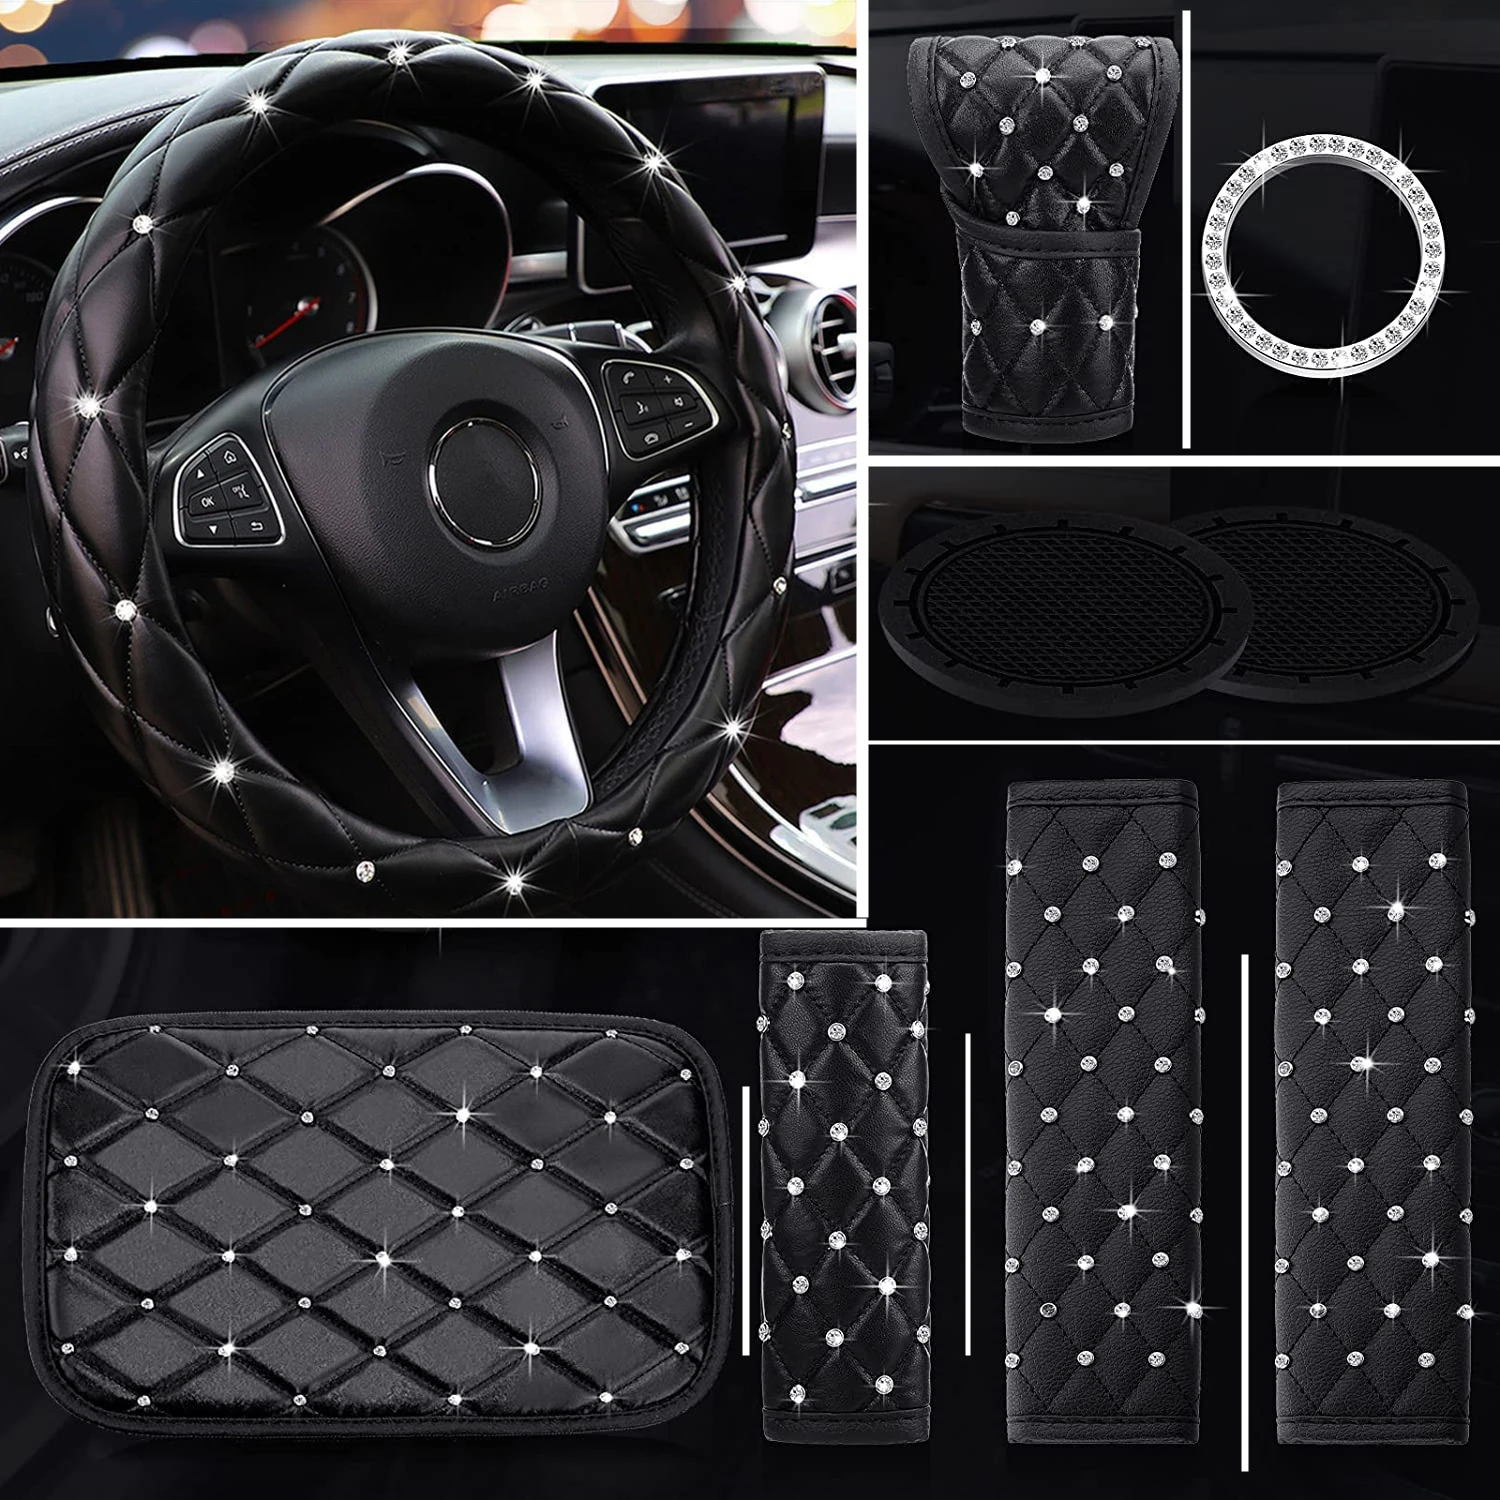 9 Pcs Bling Car Accessories Set for Women Diamond Steering Wheel Cover, Rhinestone  Center Console Pad Seat Safety Belt Pad - AliExpress